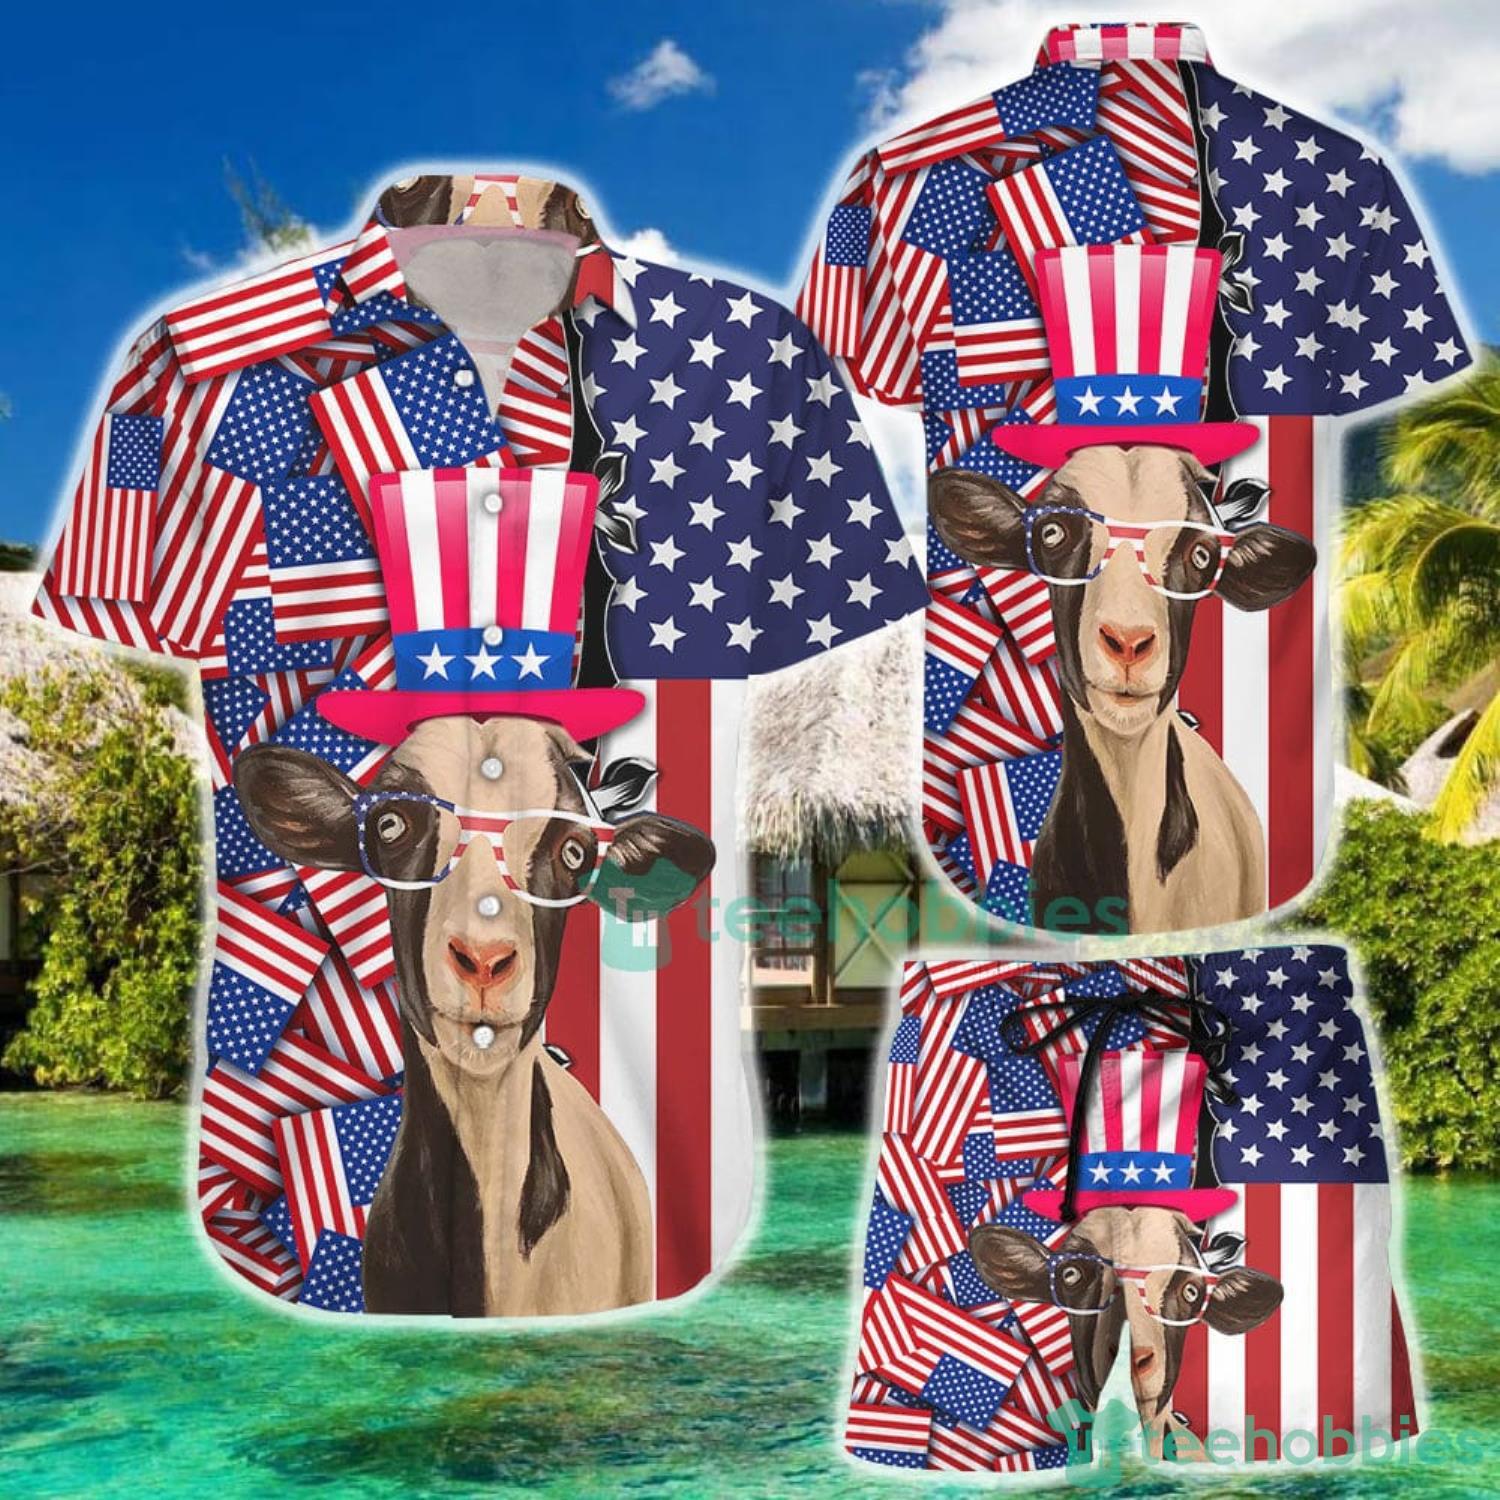 Chicago Cubs MLB Hawaiian Shirt 4th Of July Independence Day Ideal Gift For  Men And Women - YesItCustom